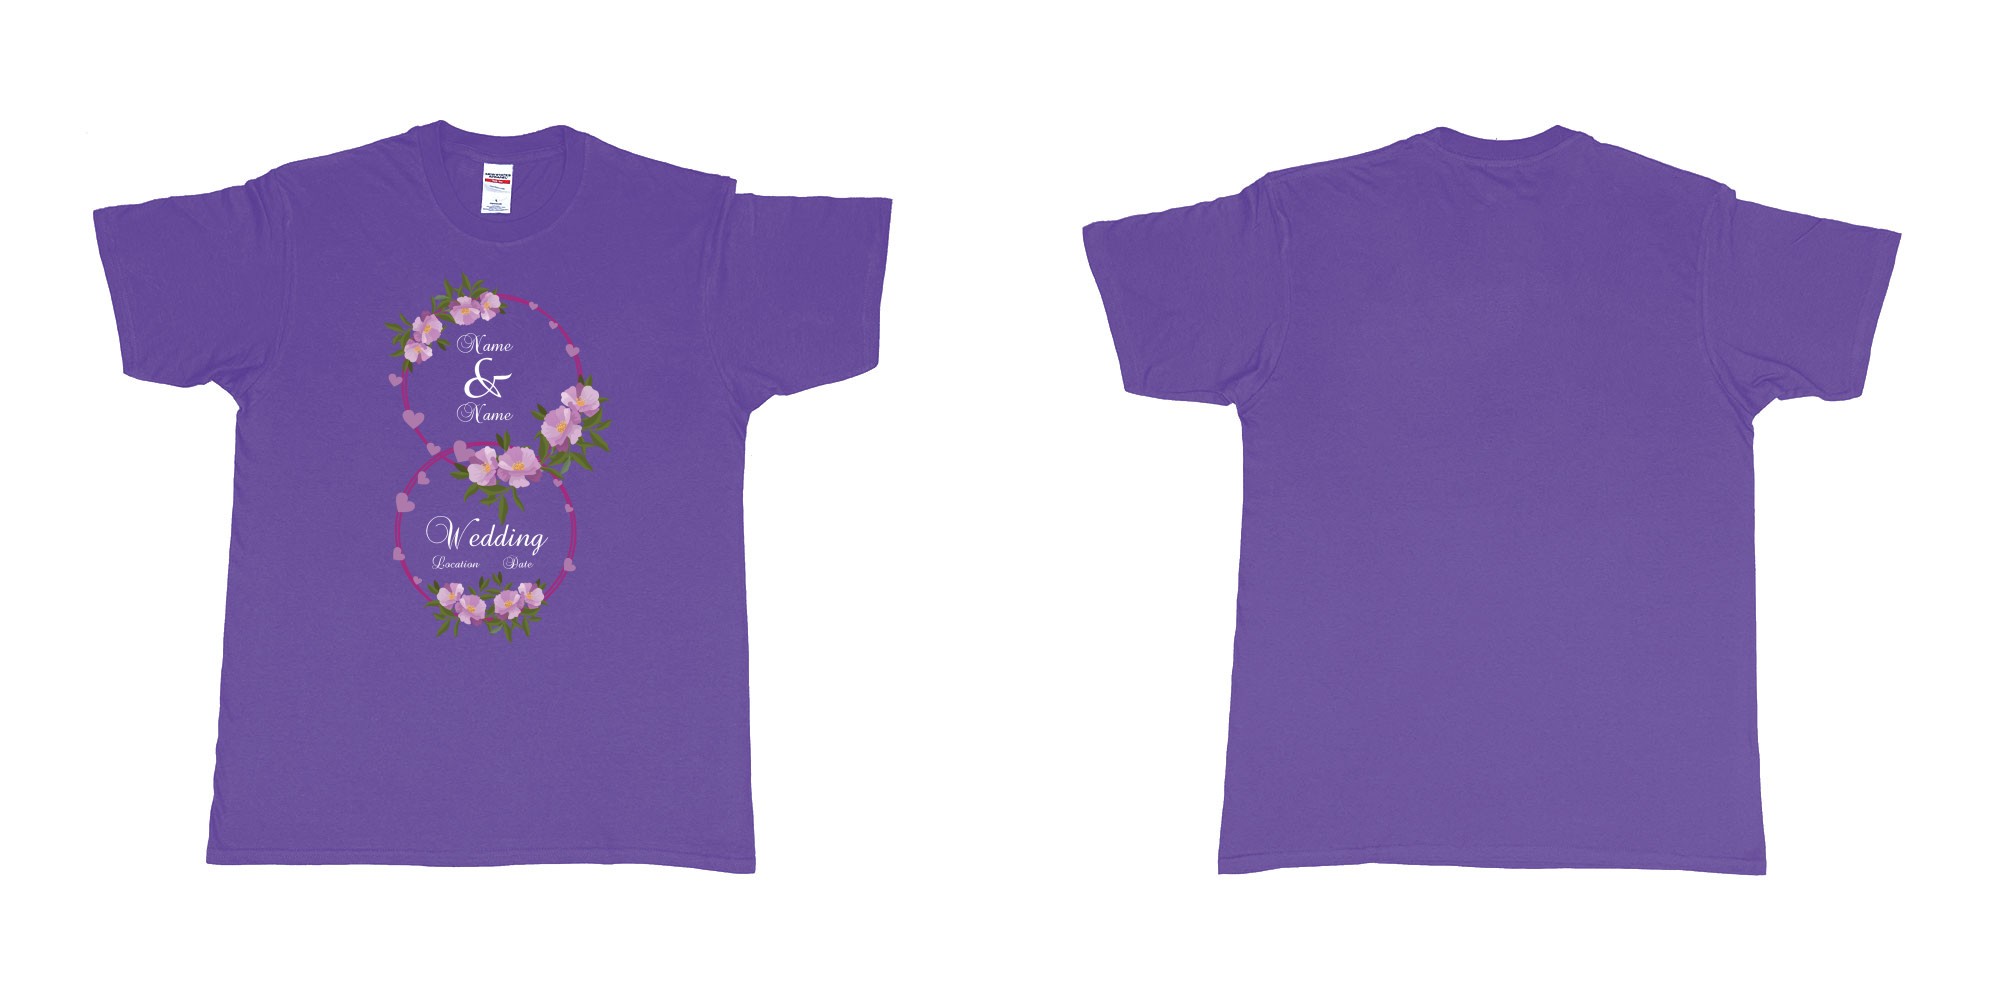 Custom tshirt design wedding hearts flower rings in fabric color purple choice your own text made in Bali by The Pirate Way